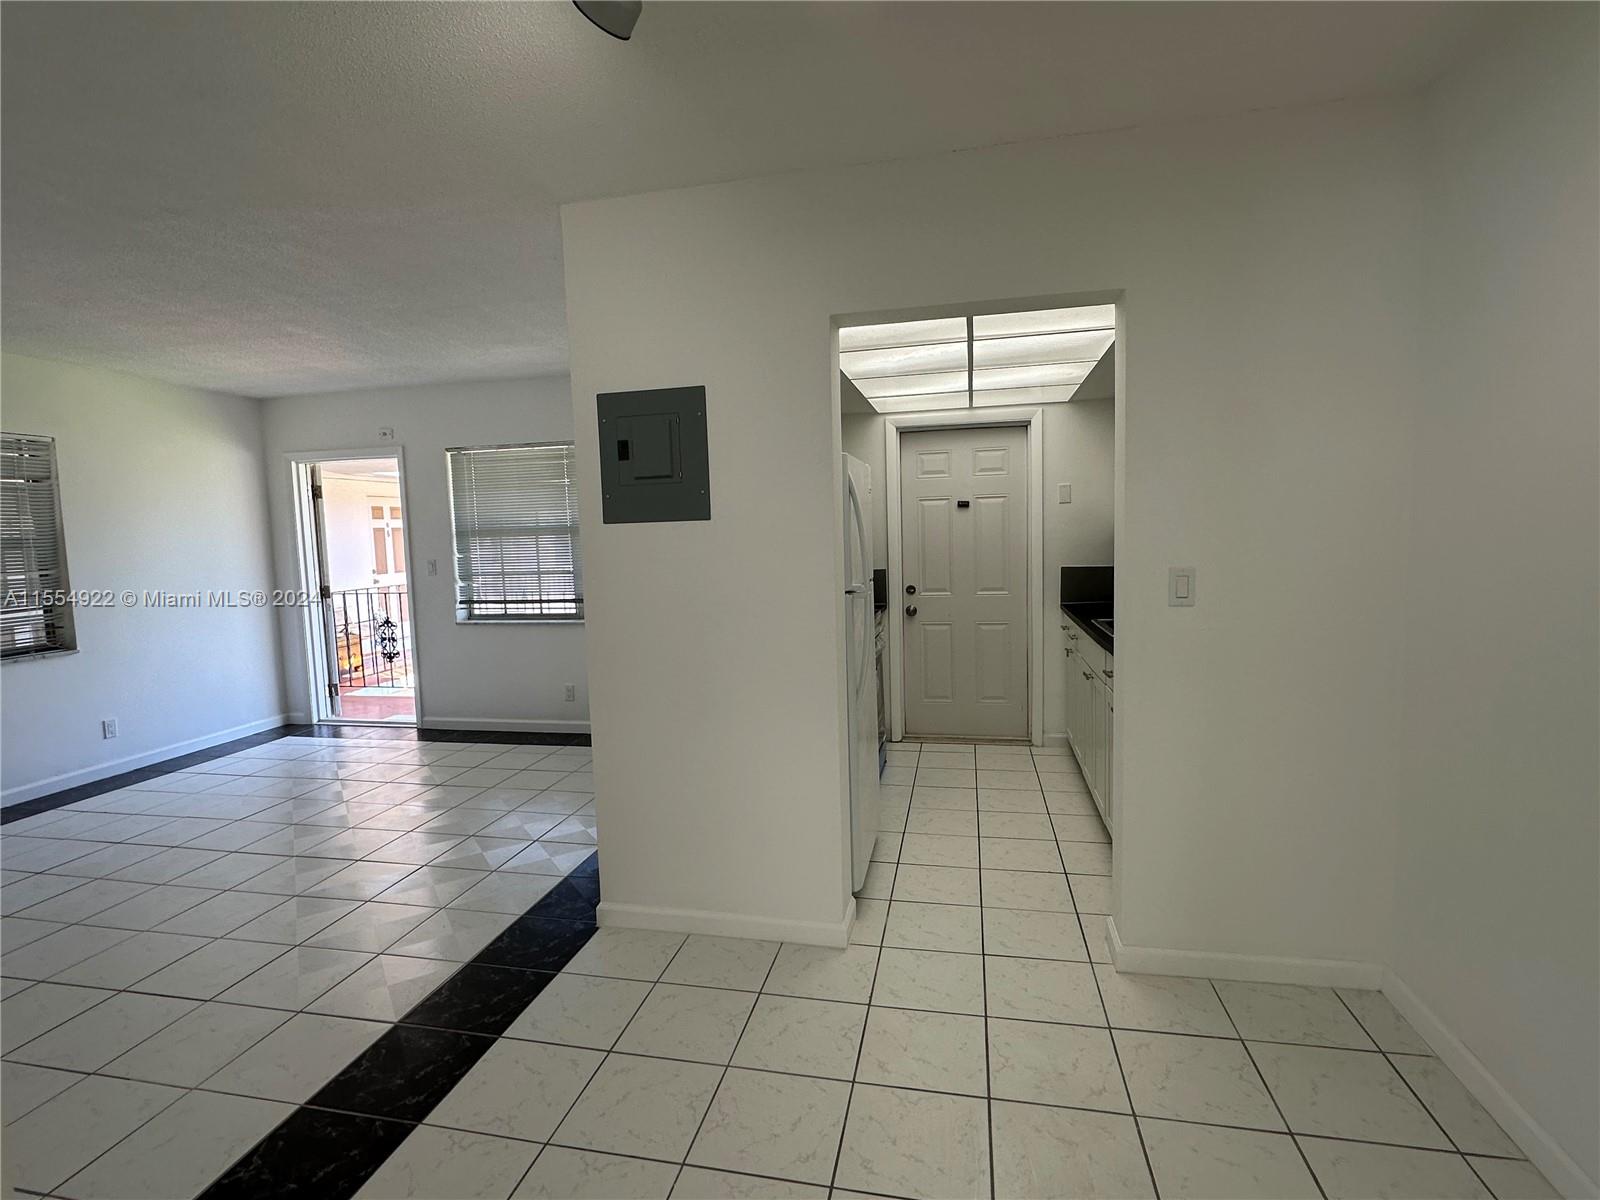 1825 Cleveland St 18, Hollywood, Florida 33020, 1 Bedroom Bedrooms, ,1 BathroomBathrooms,Residentiallease,For Rent,1825 Cleveland St 18,A11554922